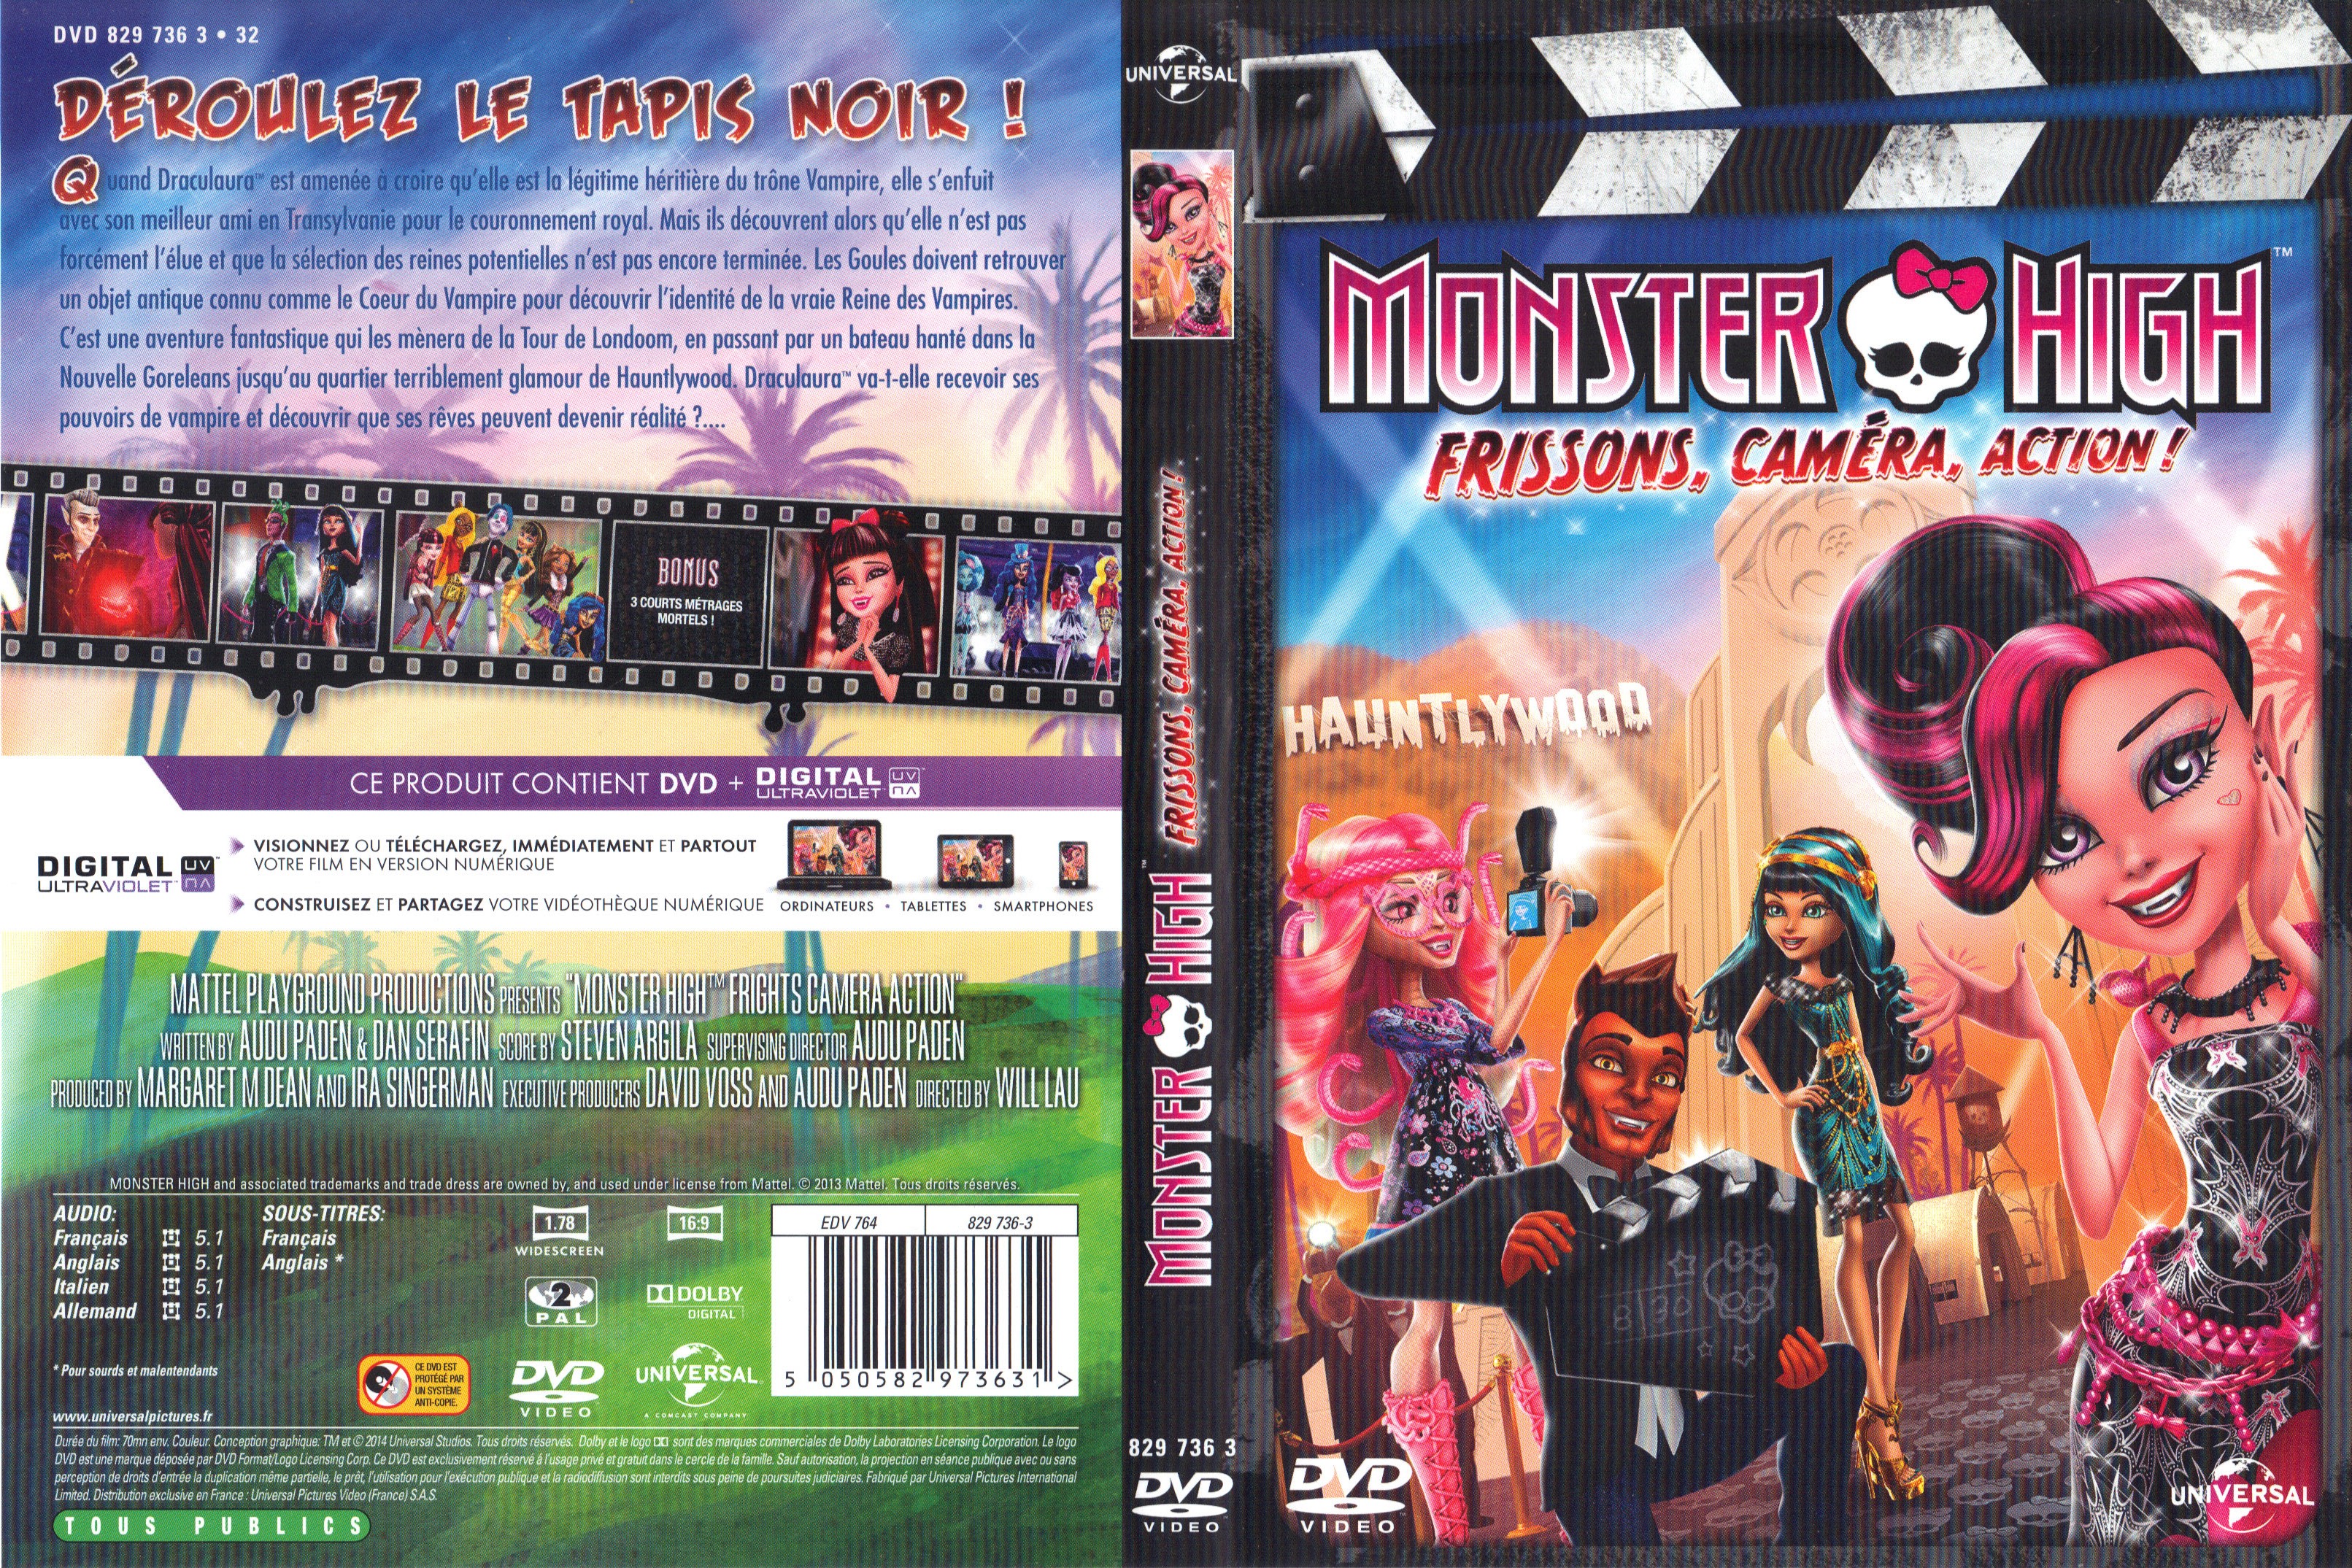 Jaquette DVD Monster High - Frissons,Camra,Action !